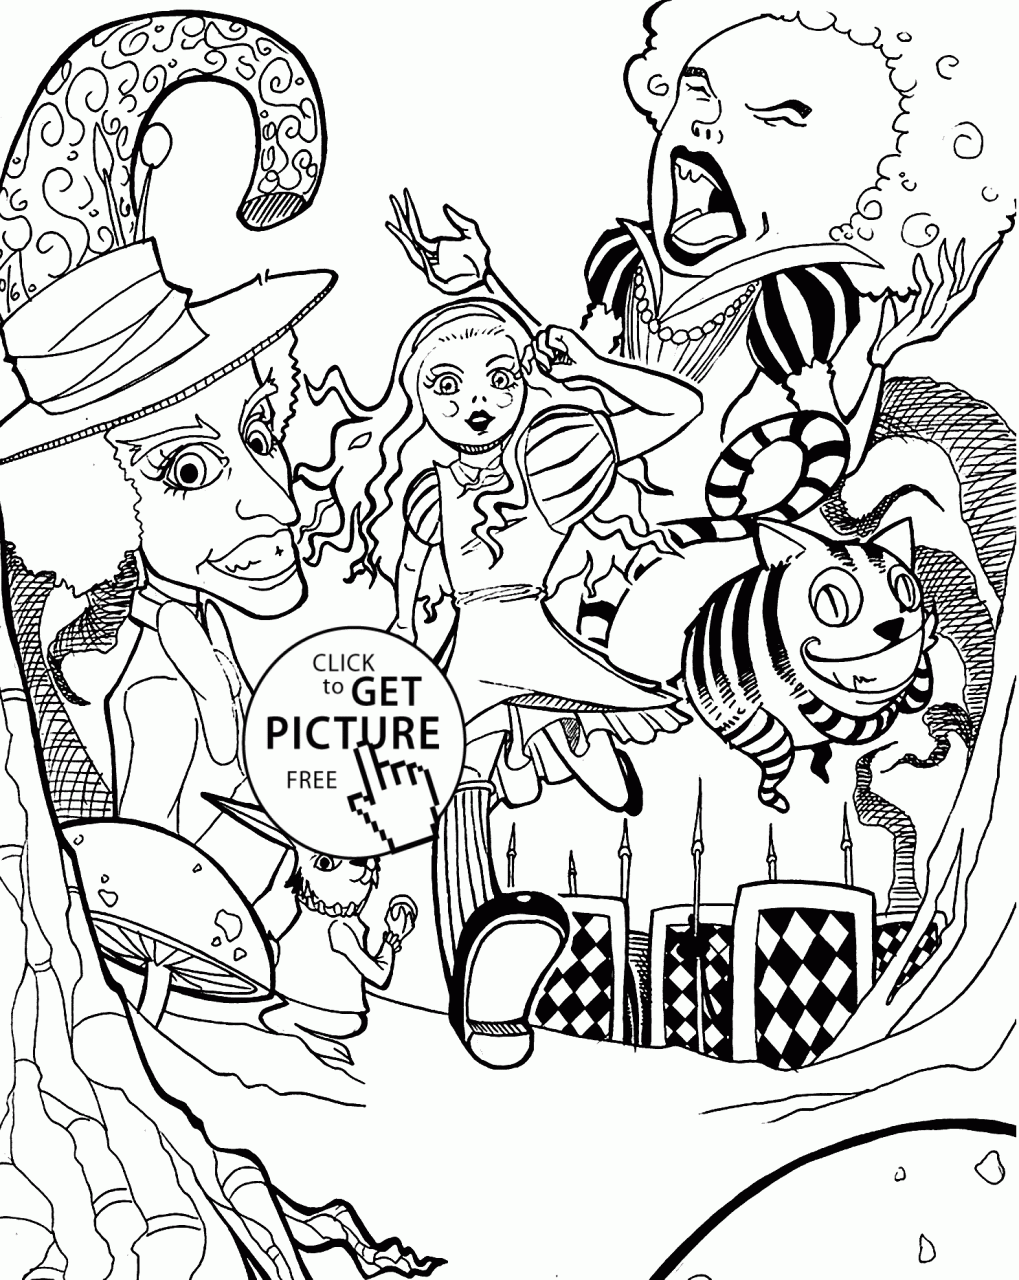 Alice in wonderland coloring pages movie for kids, printable free